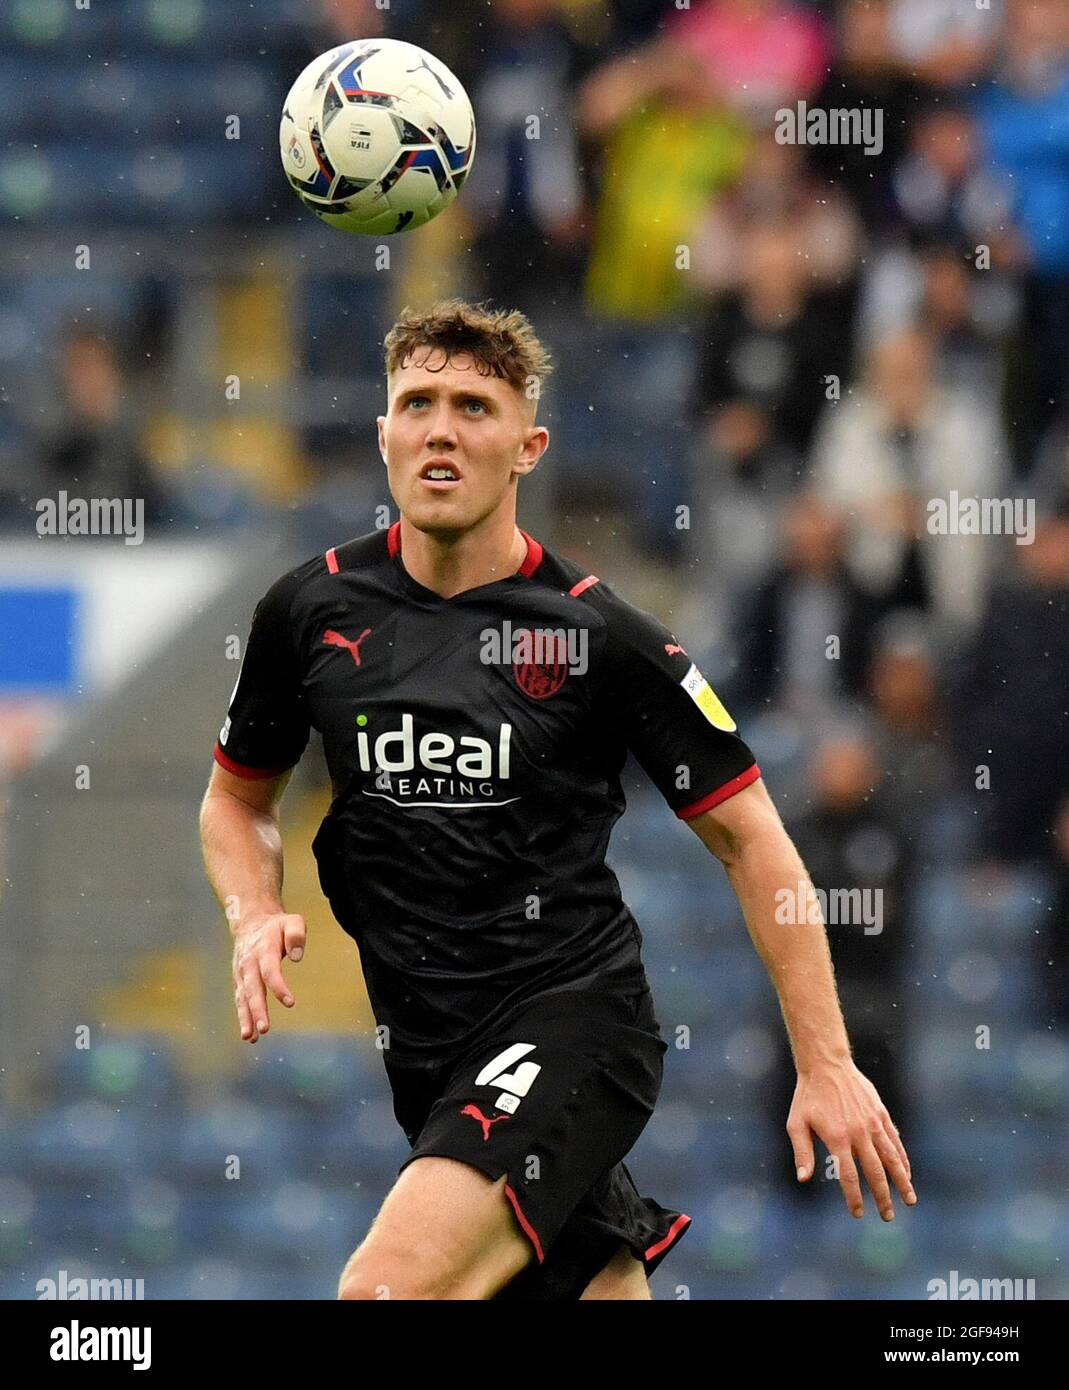 West Bromwich Albion's Dara O'Shea in action during the Sky Bet Championship match at Ewood Park, Blackburn. Picture date: Saturday August 21, 2021. Stock Photo